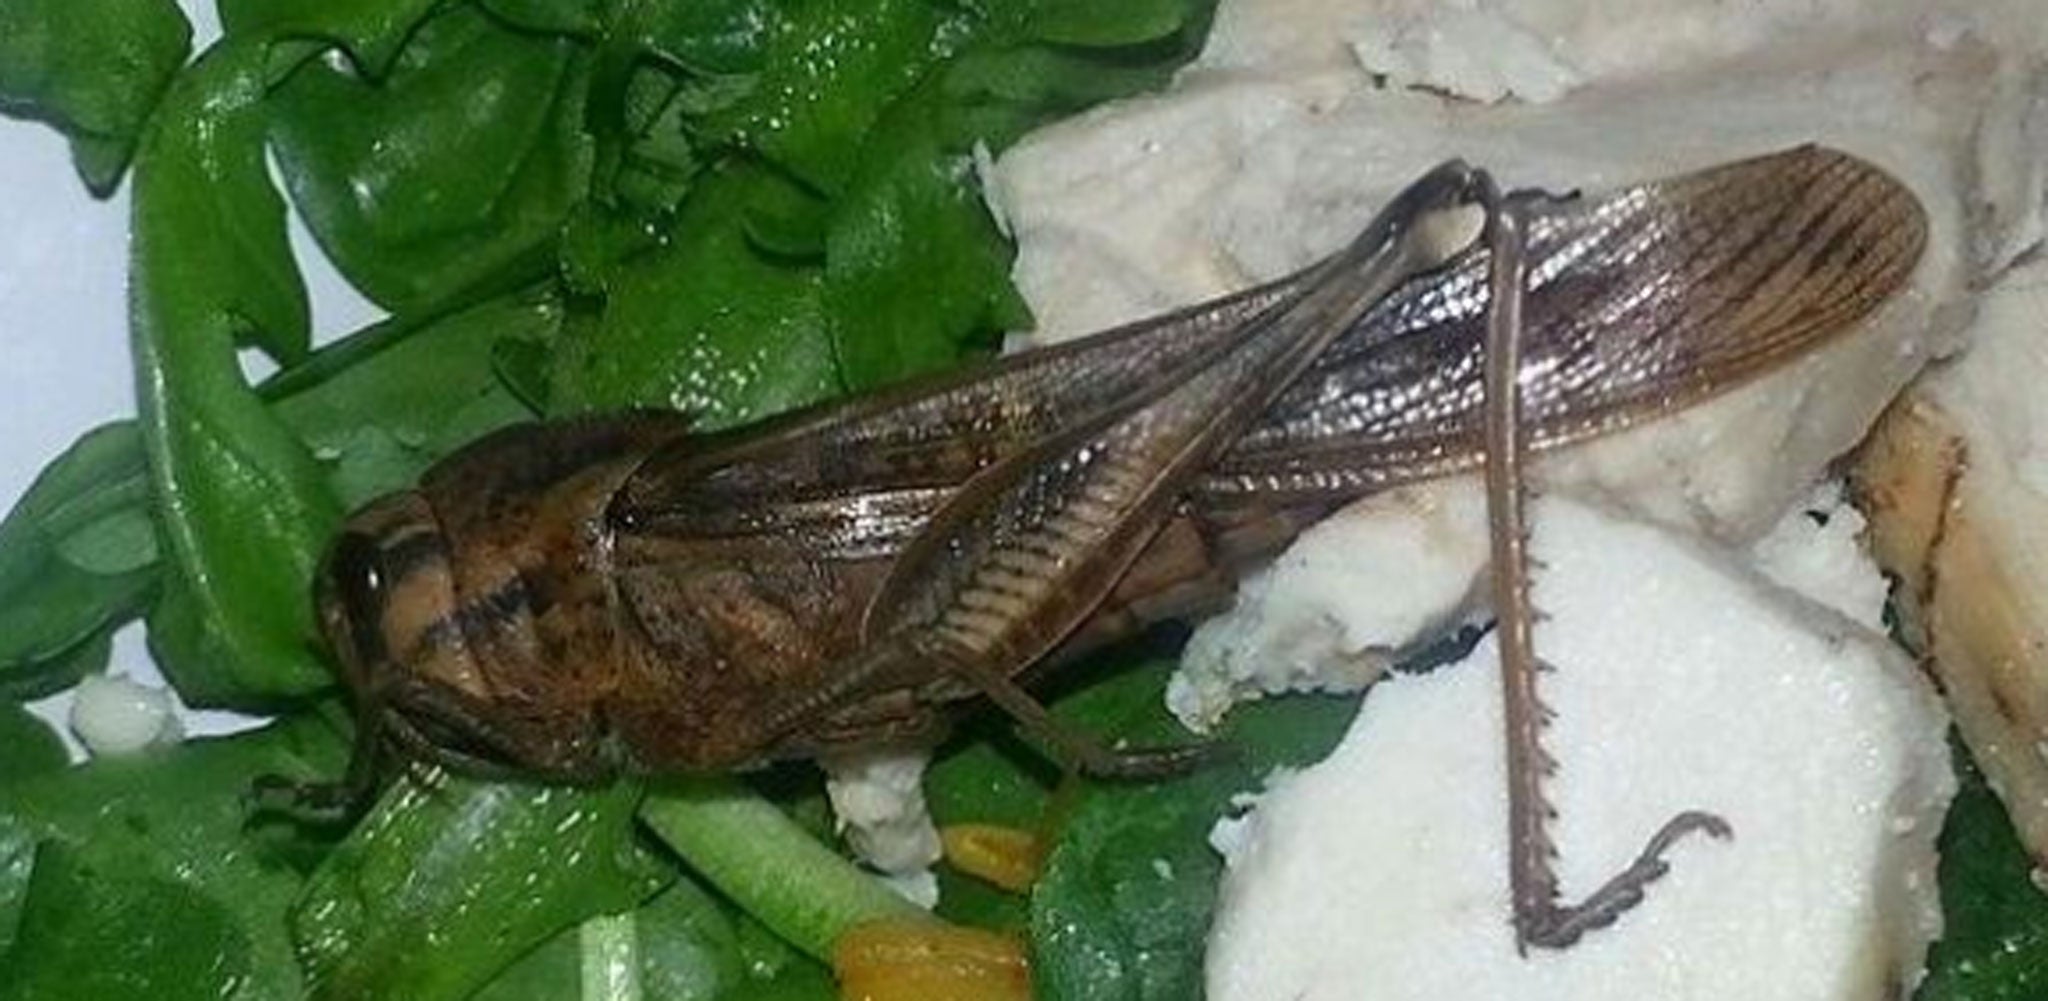 The locust Ms Baker discovered in her lunch